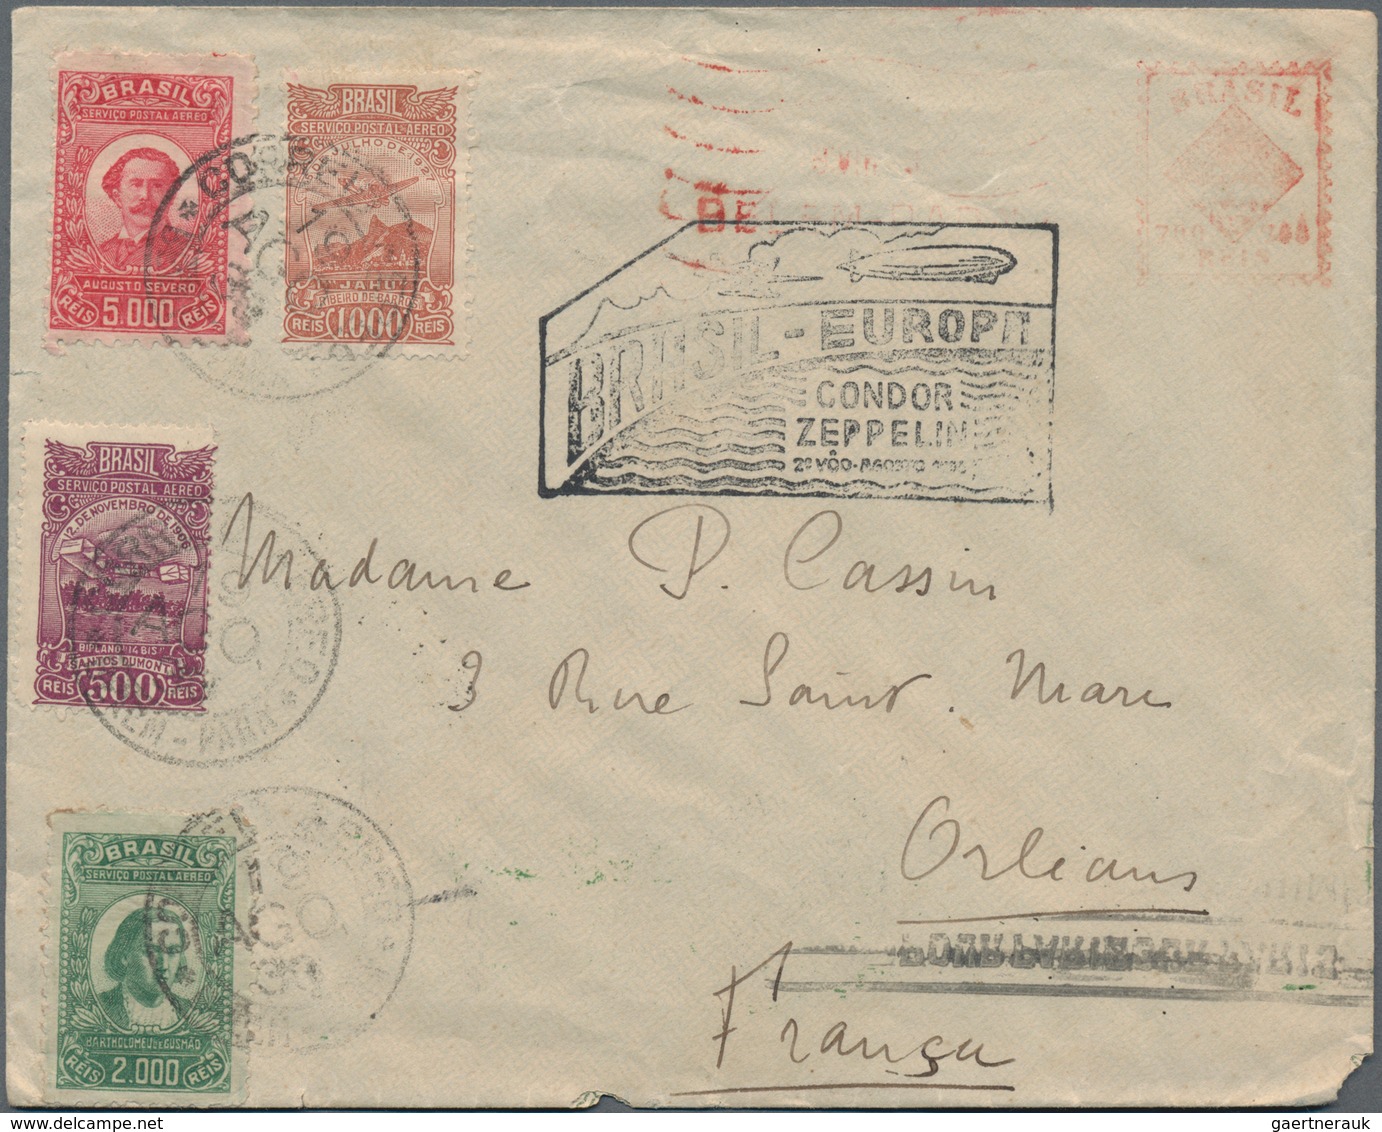 Brasilien - Flugpost: 1932/1933, Correspondence To Orleans/France, Lot Of Six Airmail Covers, E.g. C - Luftpost